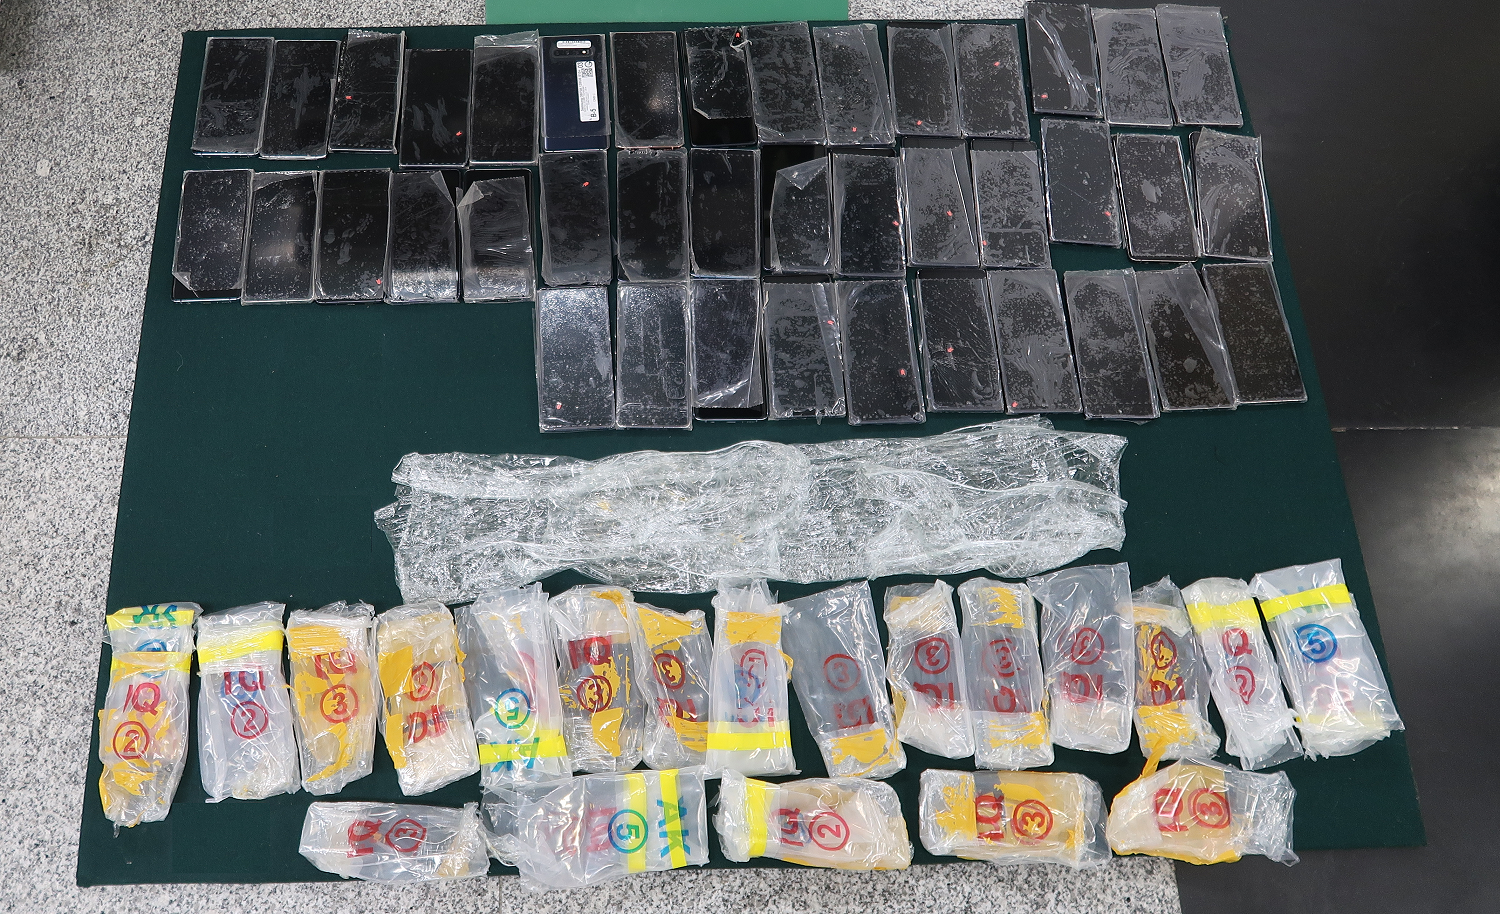 Hong Kong Customs yesterday (February 9) detected a suspected mobile phone smuggling case at the Shenzhen Bay Control Point and seized 40 mobile phones with an estimated market value of about $35,000. Photo shows the suspected smuggled mobile phones seized.